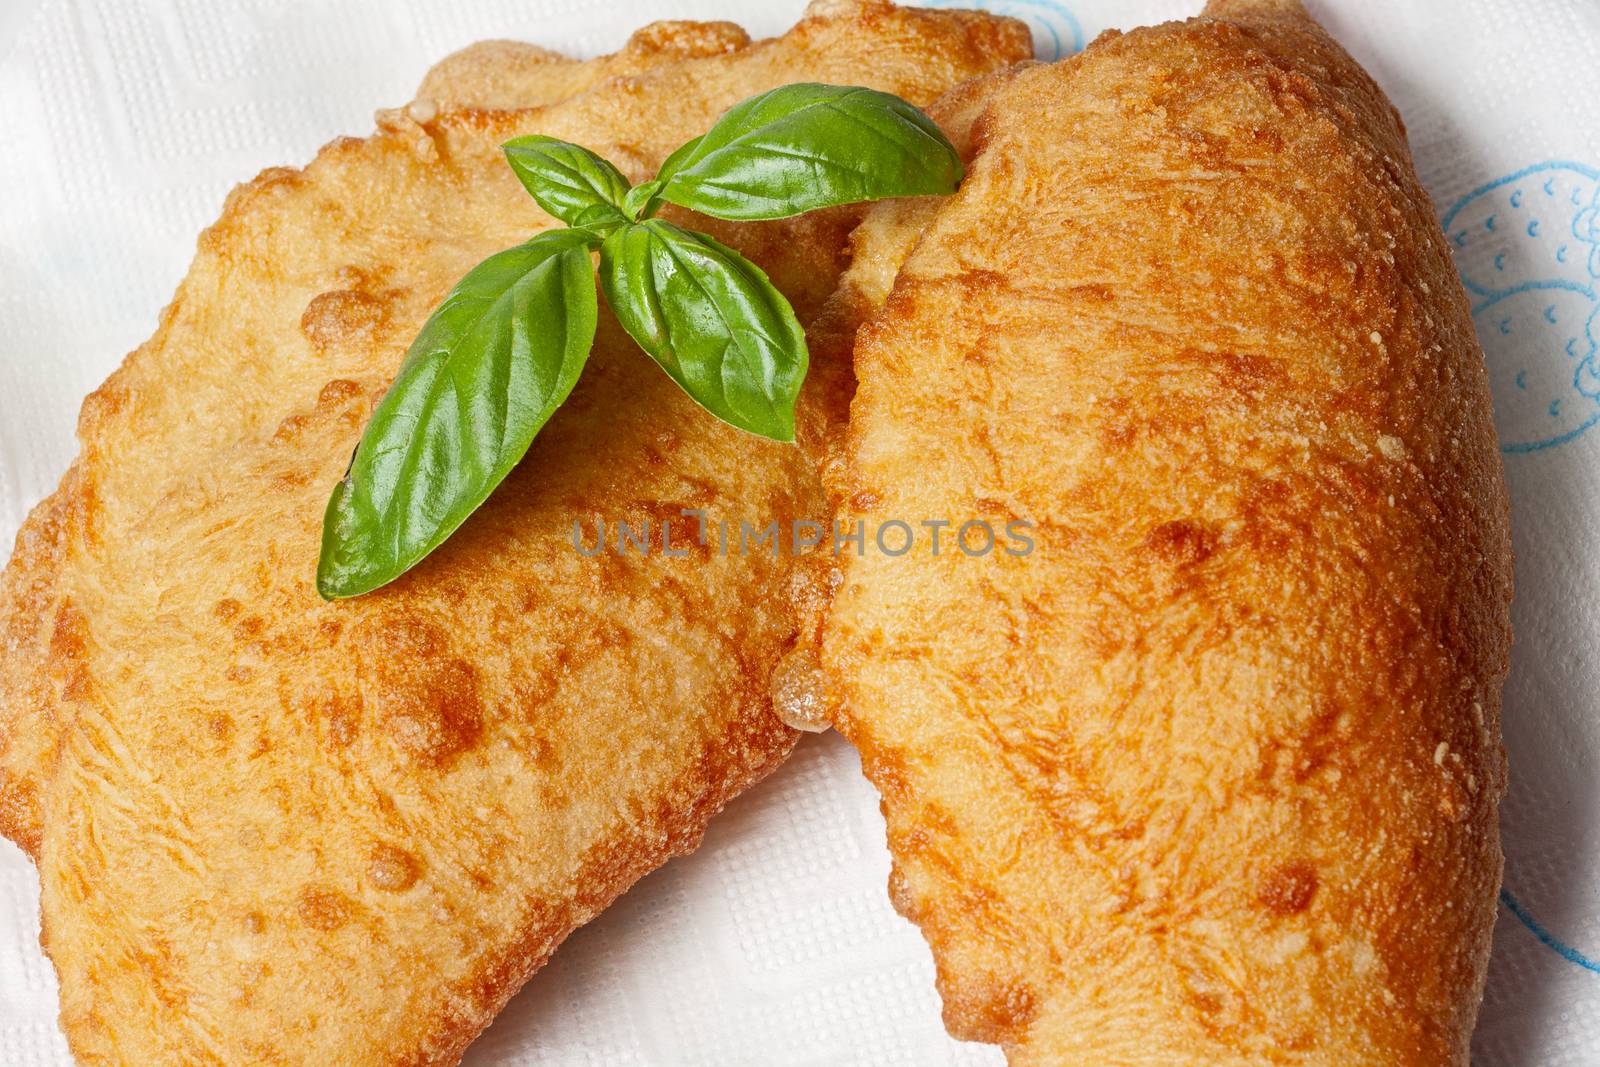 typical specialty of Puglia, the panzerotto